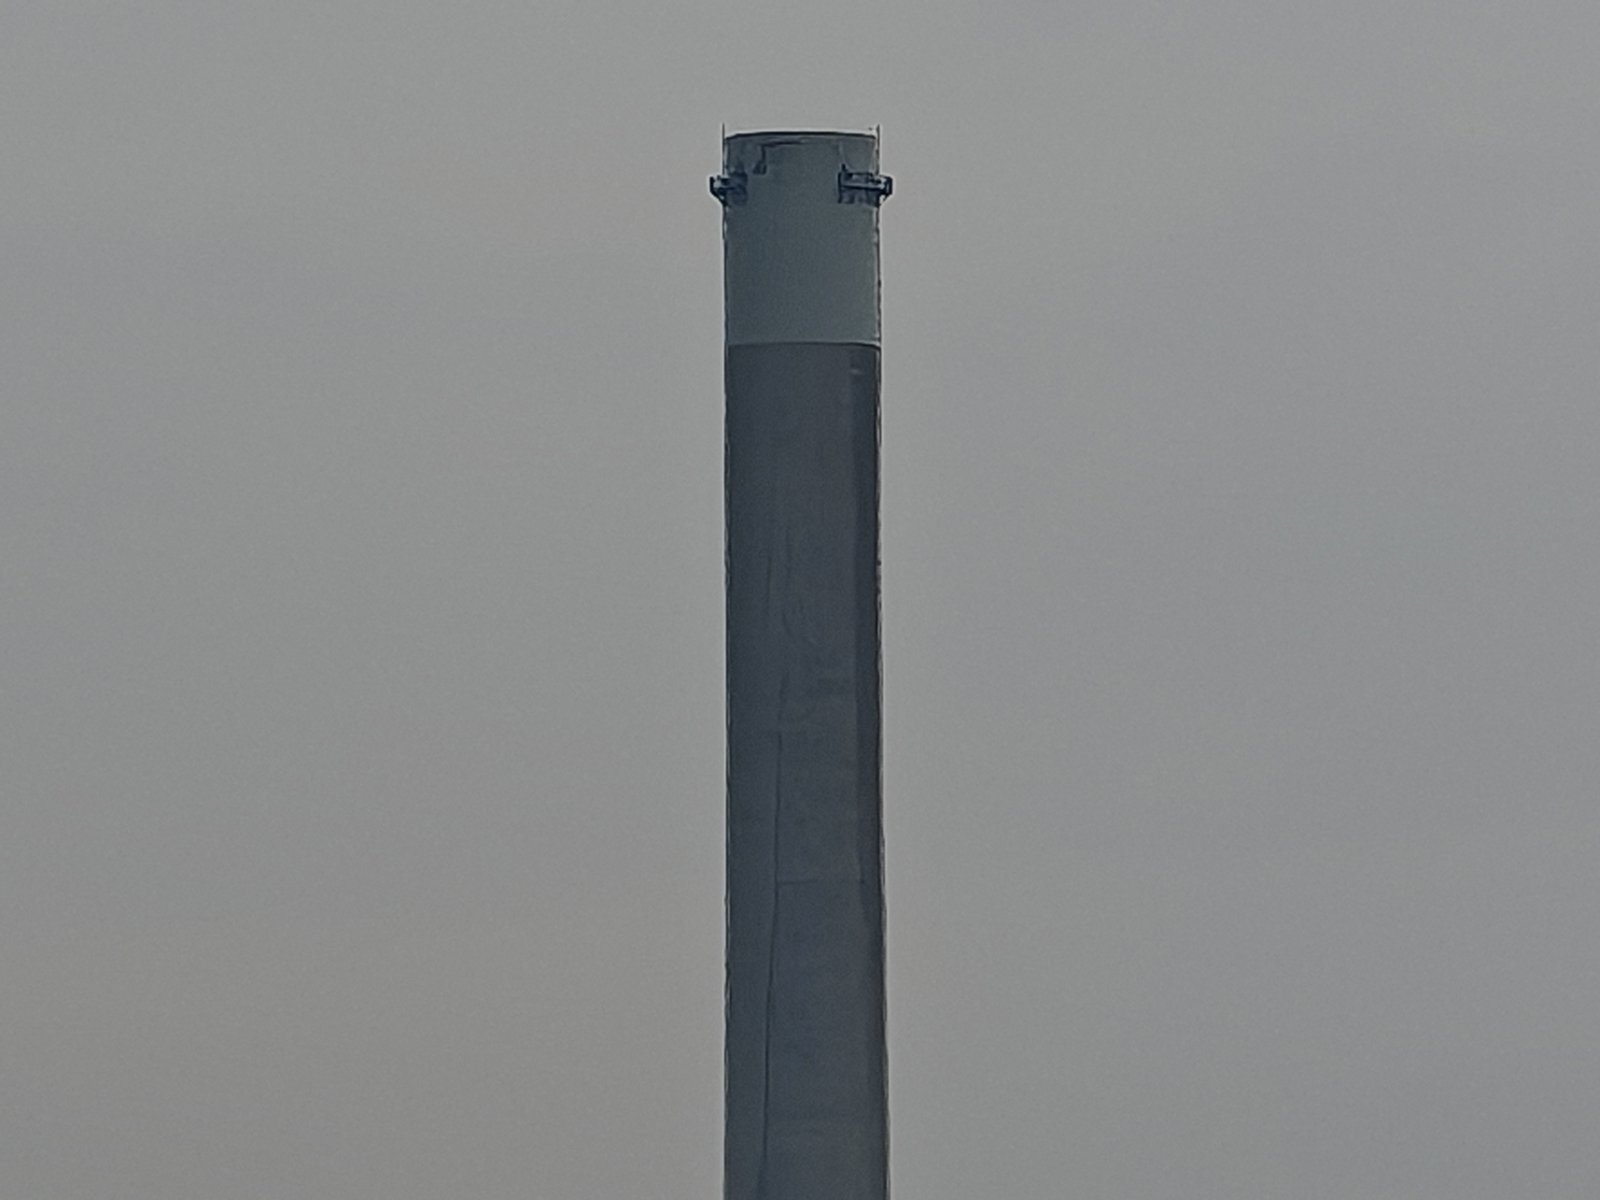 A close-up view of a tall, cylindrical industrial smokestack against a hazy gray sky. the stack has a slightly weathered surface and features two pipes protruding from its top.